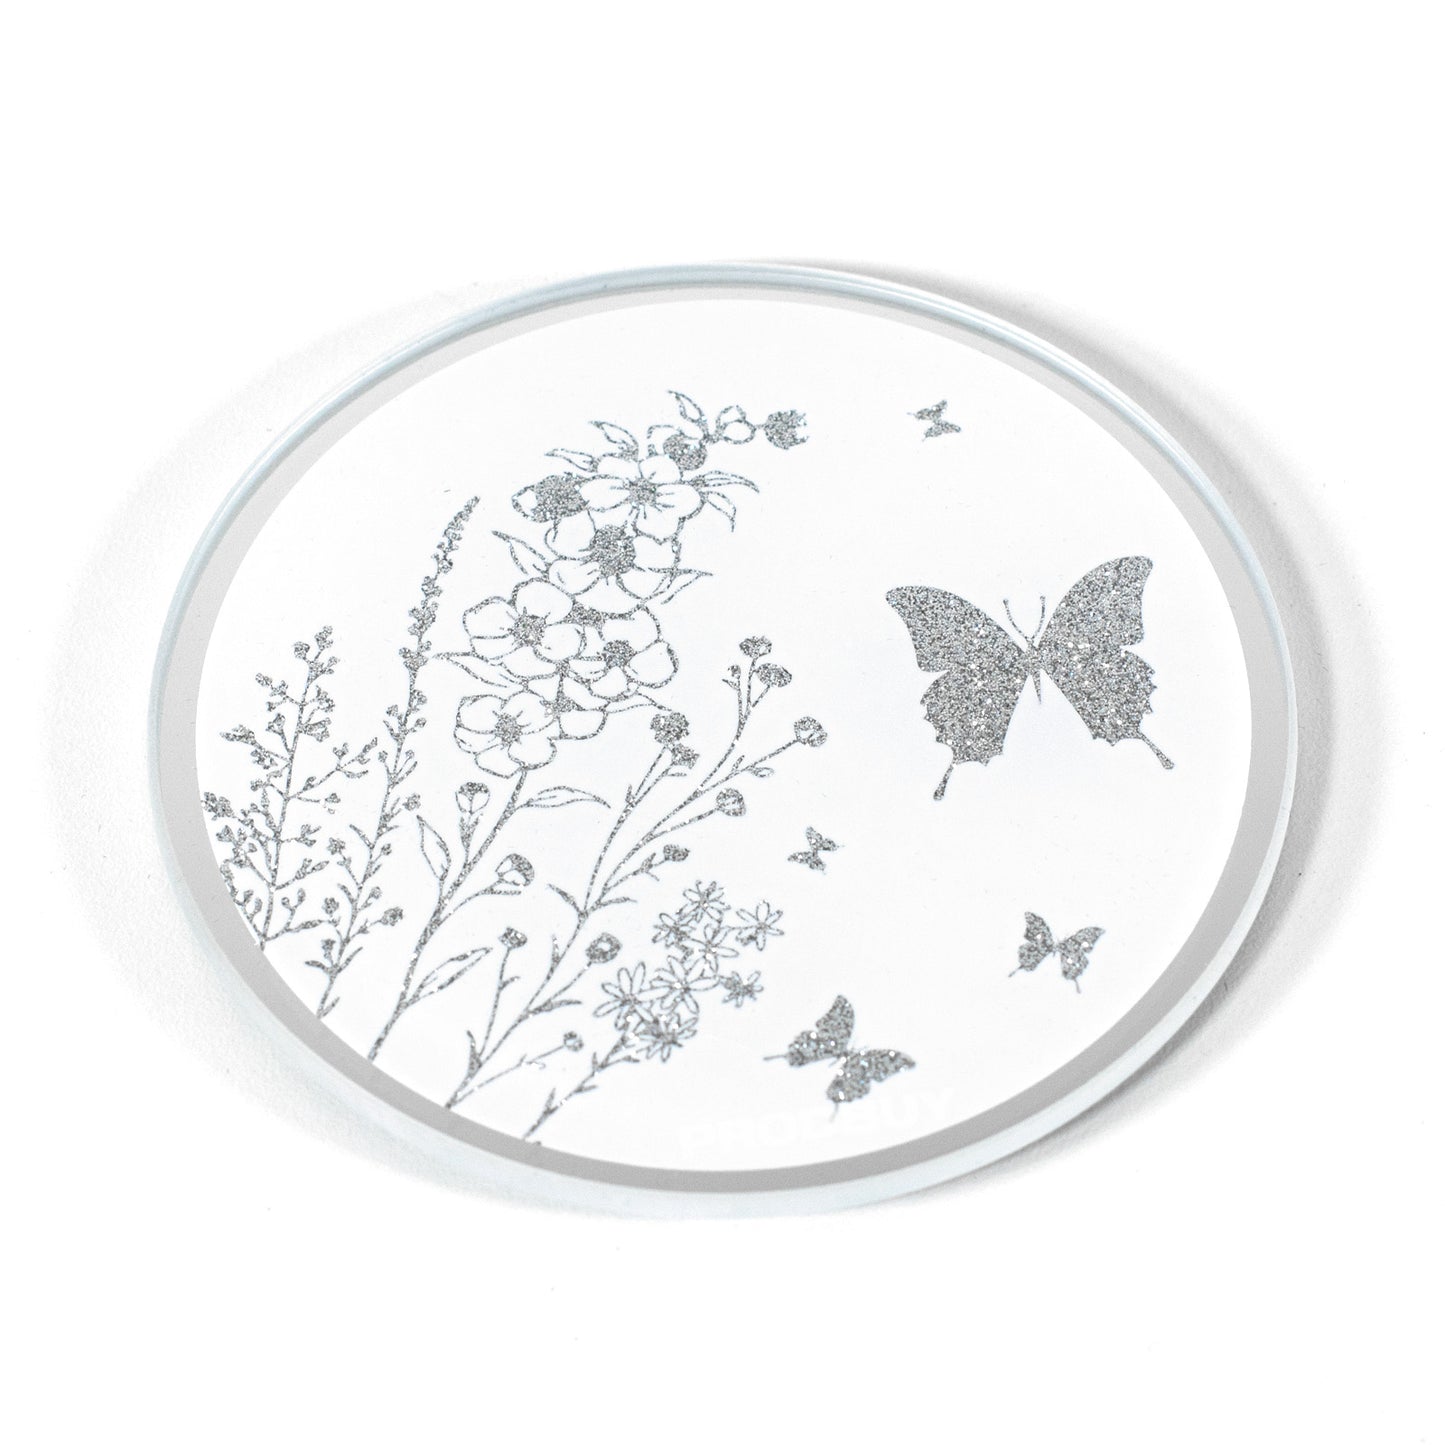 Set of 4 Round 10cm Mirrored Glass Crushed Diamond Floral Butterfly Coasters